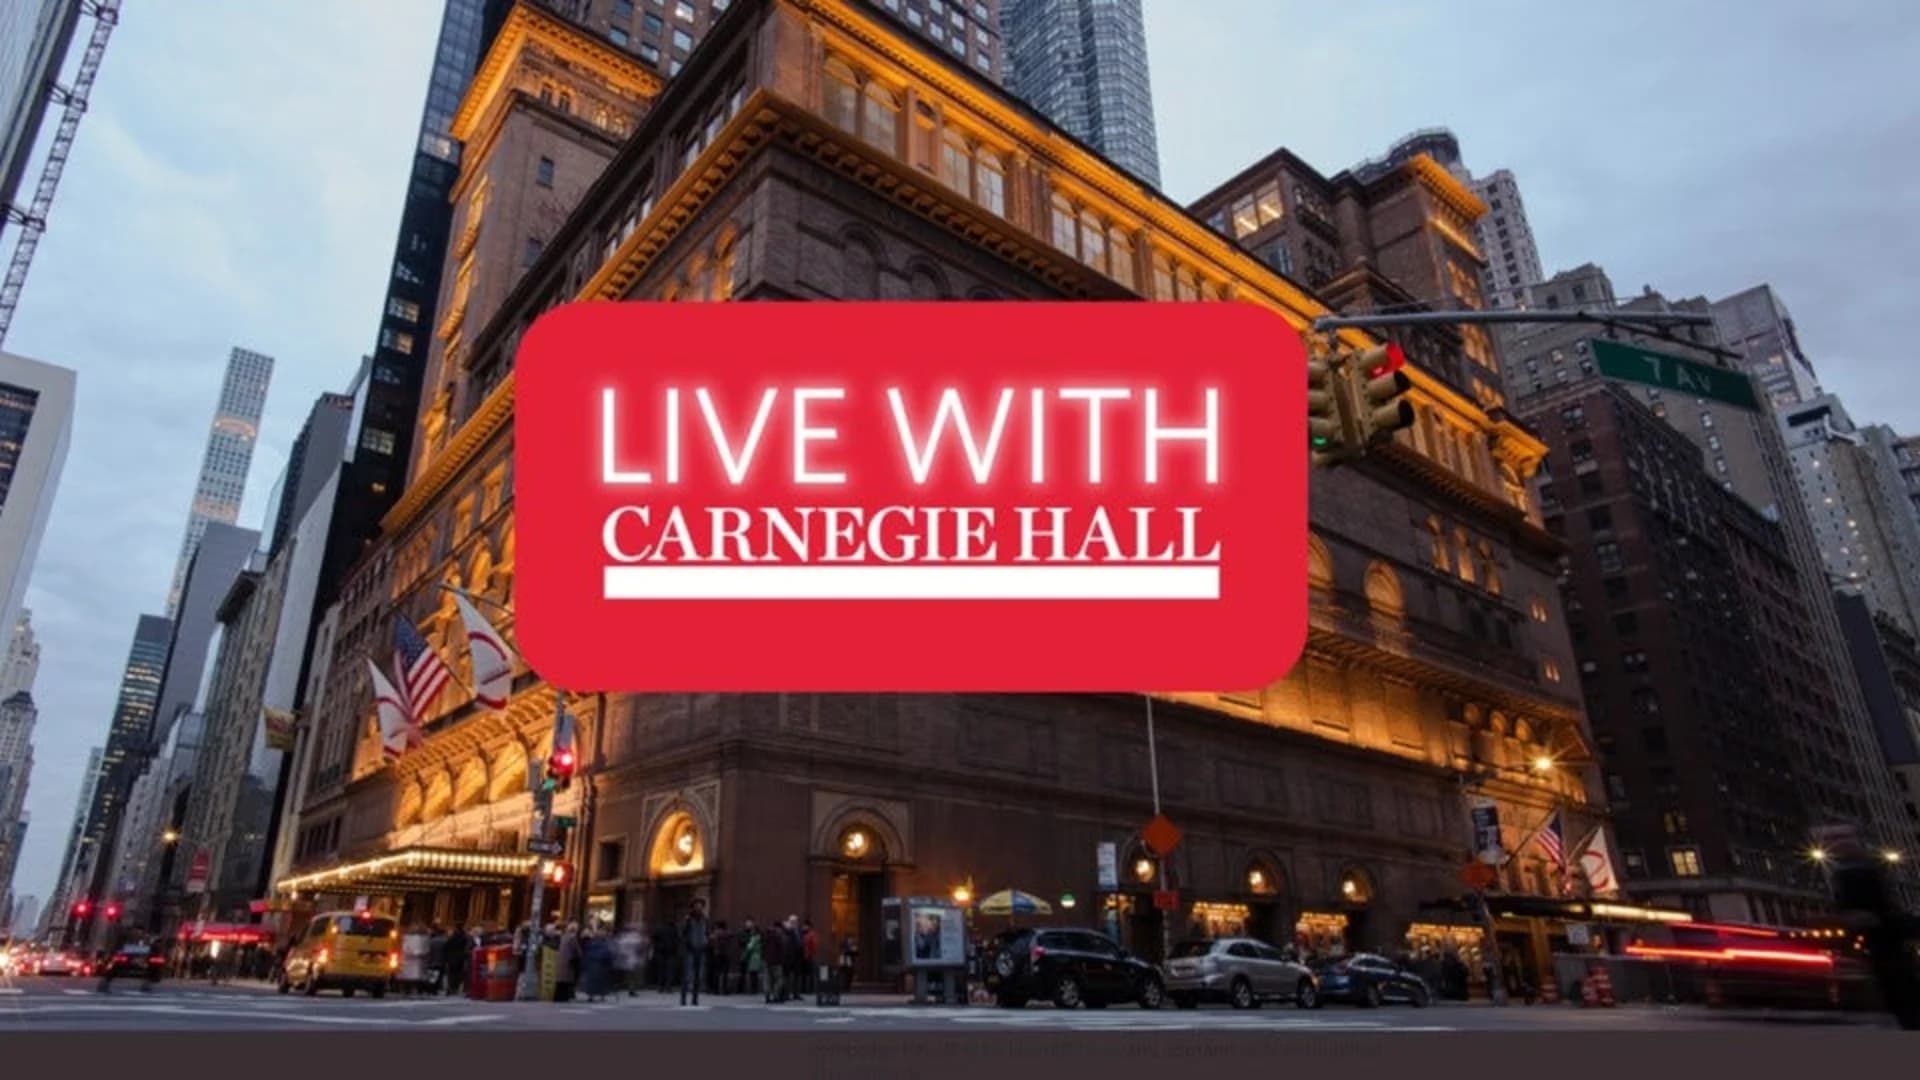 Carnegie Hall launches online series to connect artists, audiences during coronavirus pandemic